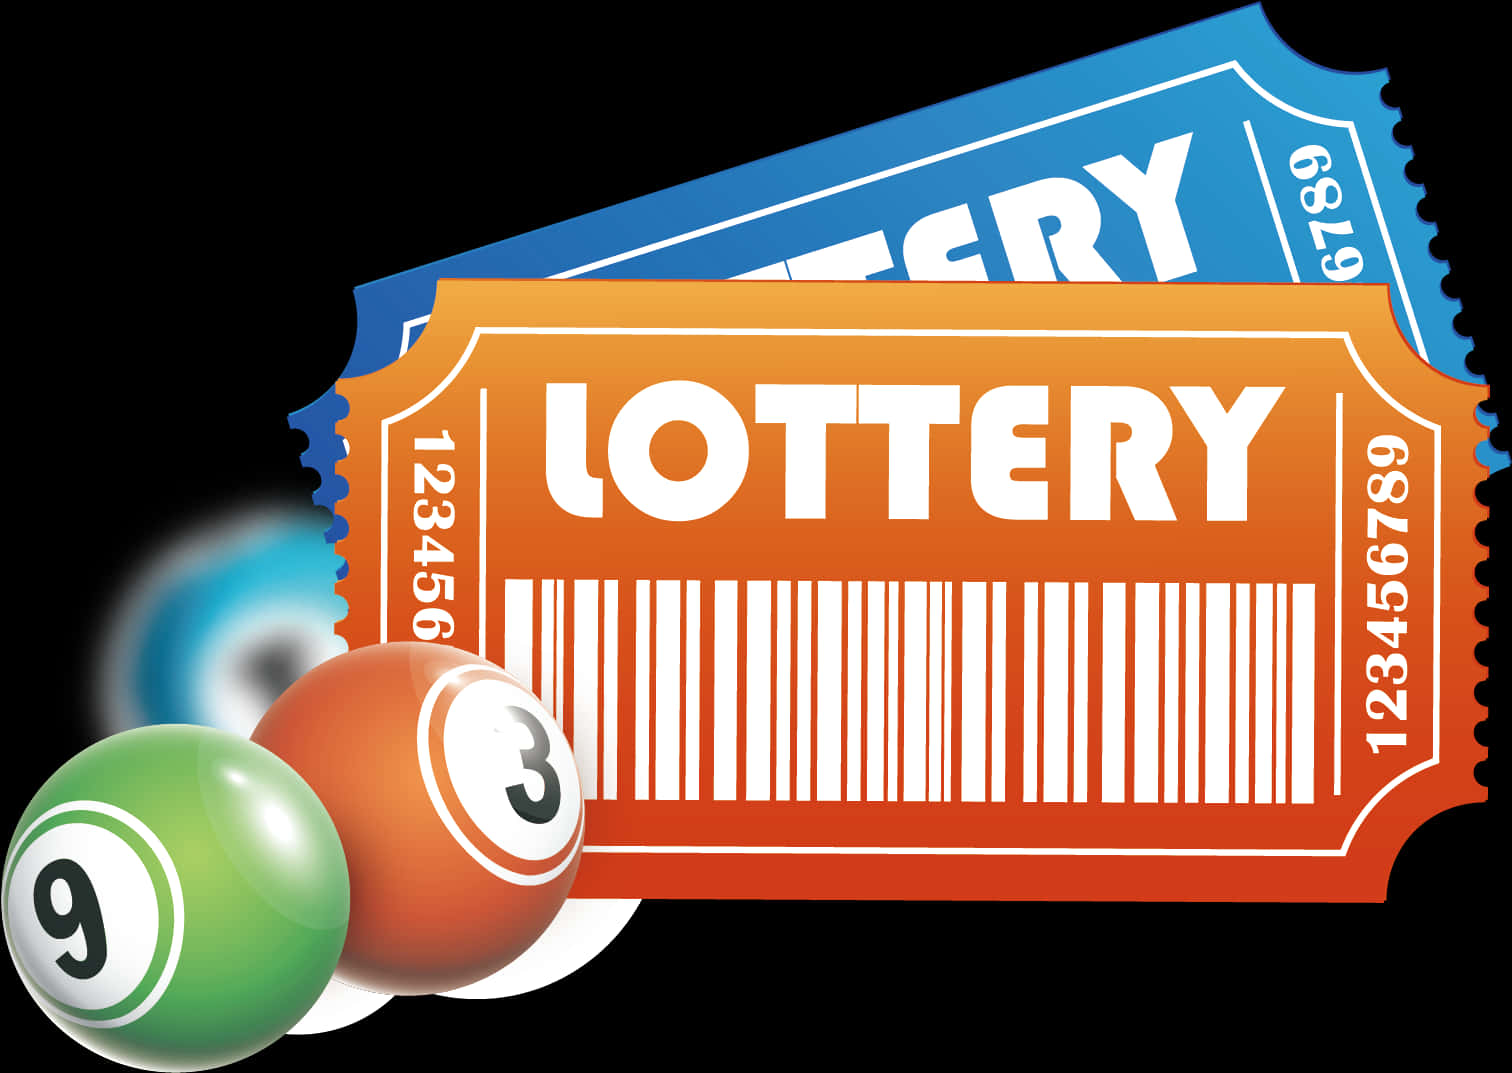 Colorful Lottery Ticketand Balls PNG image